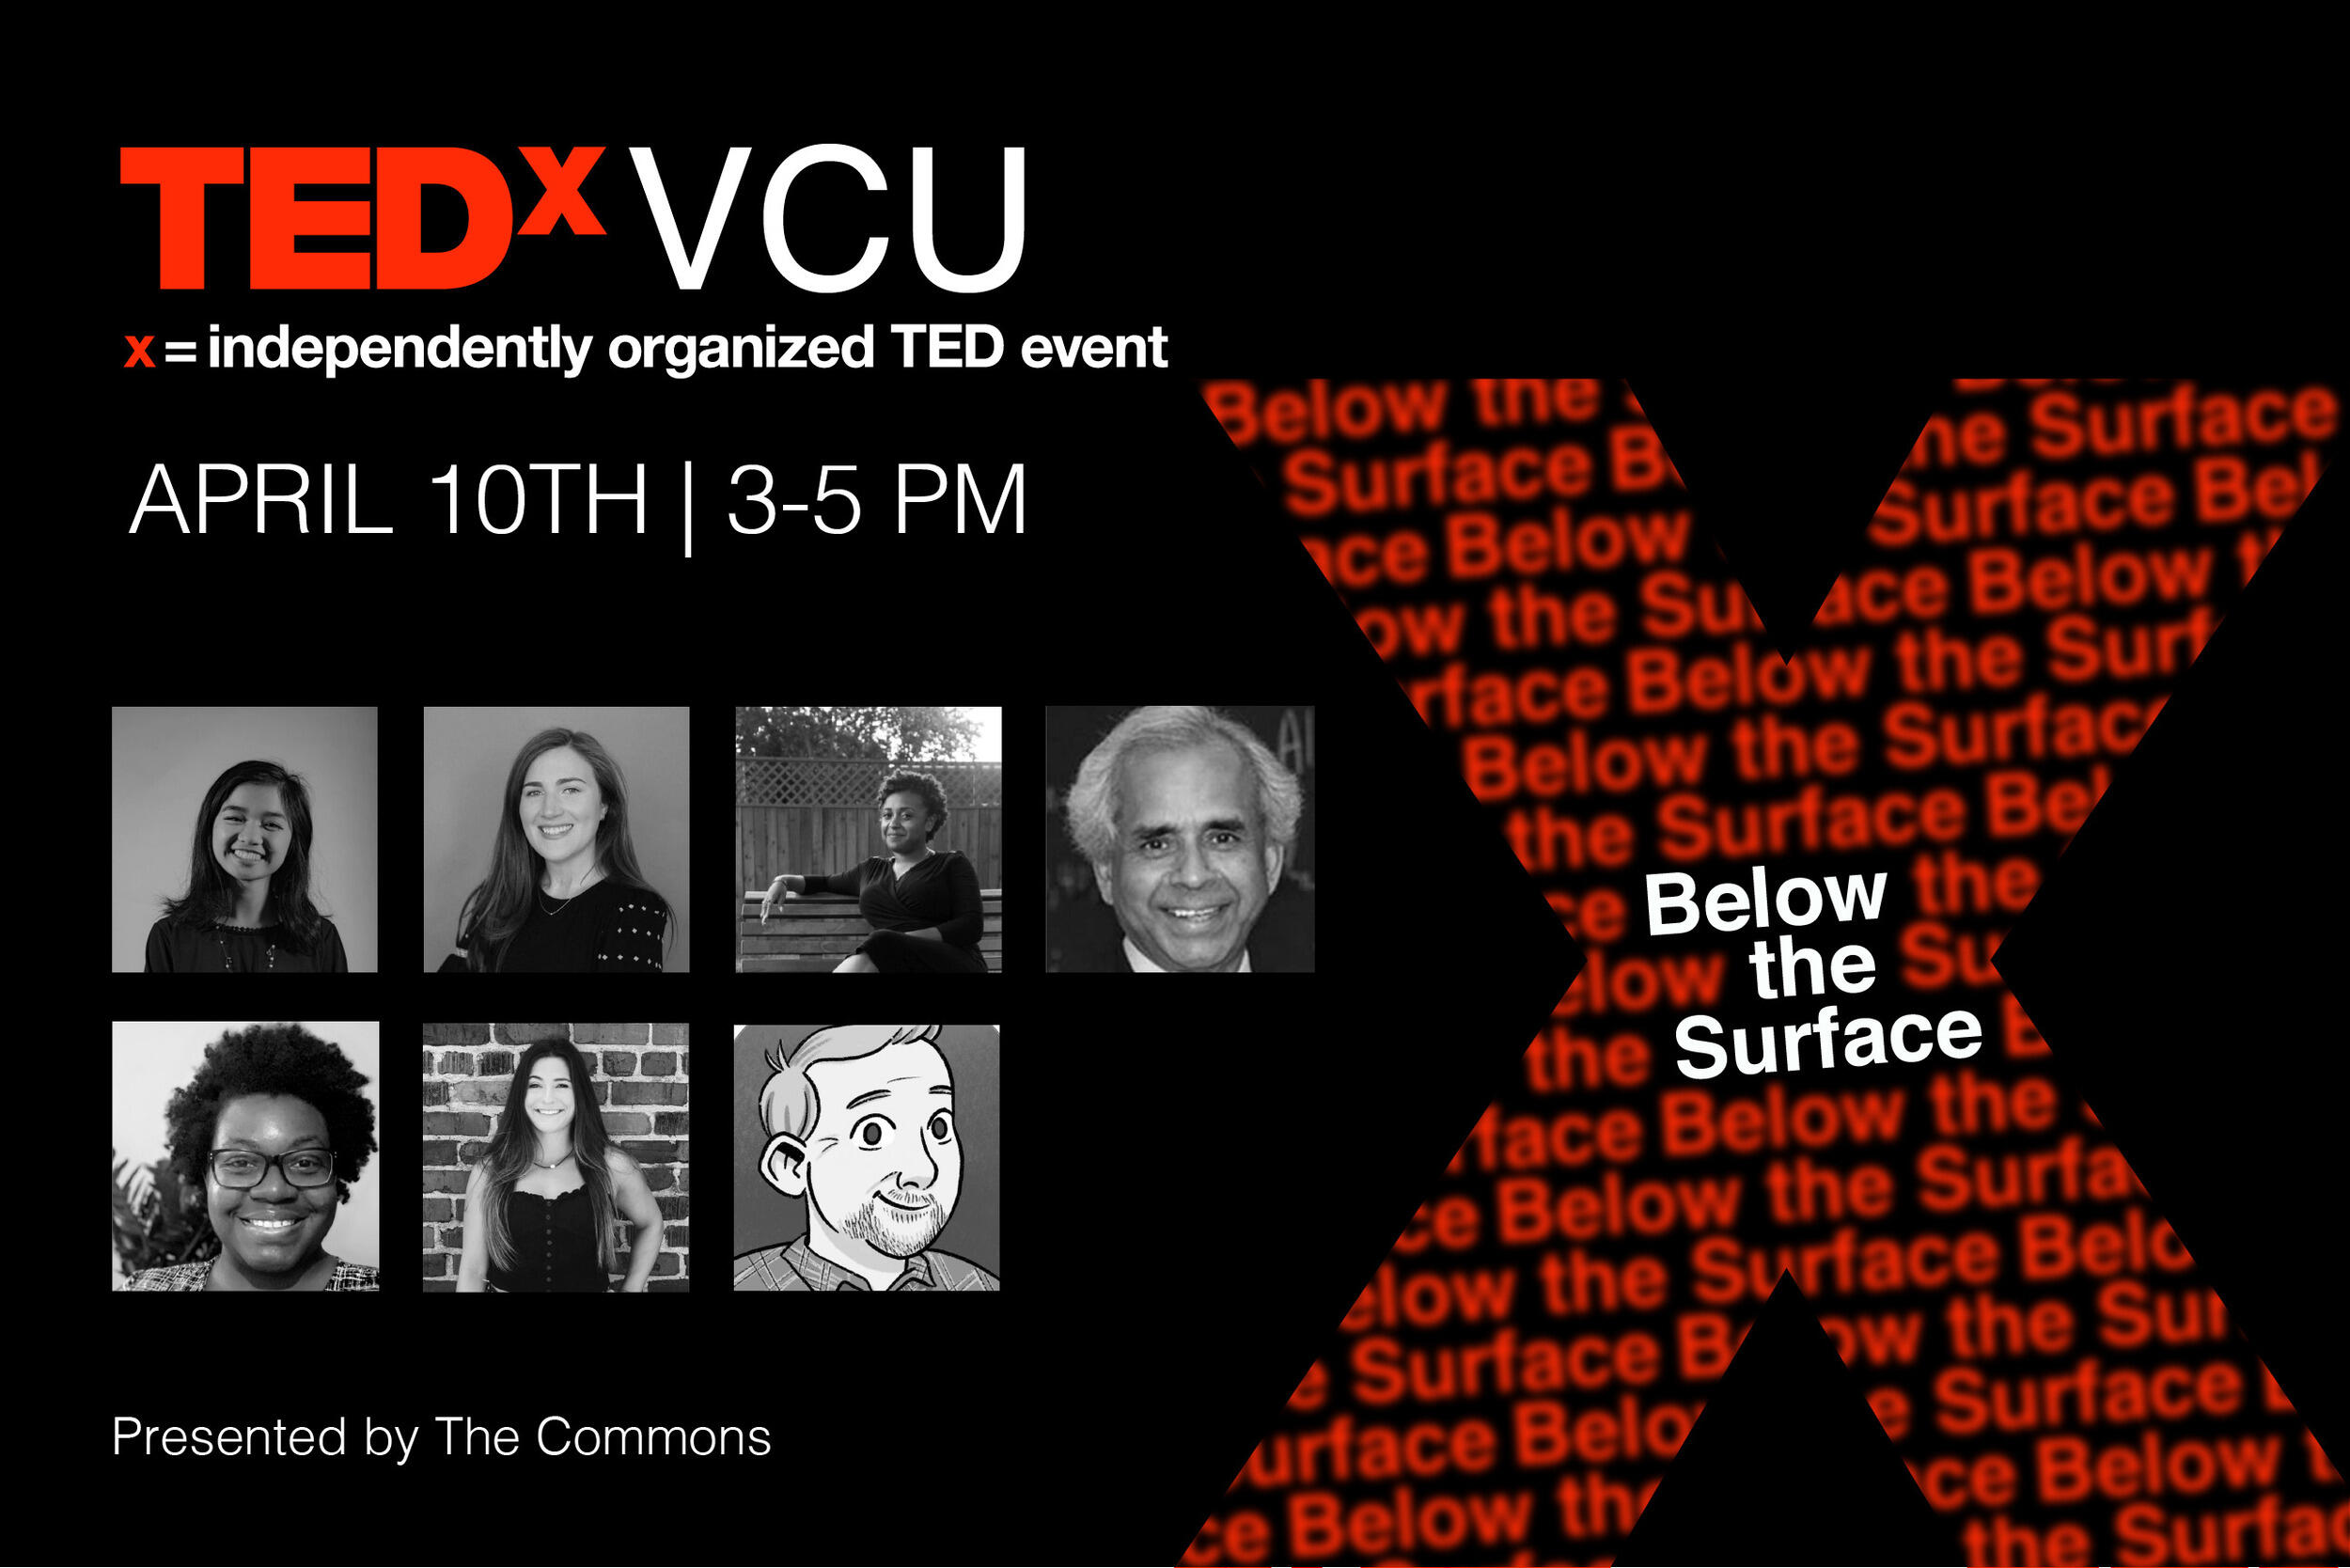 The poster for the "Below The Surface" TedX VCU event. Seven photos of presenters are included. Text on image states "Tedx VCU. x=independly organized TED event. Presented by The Commons."